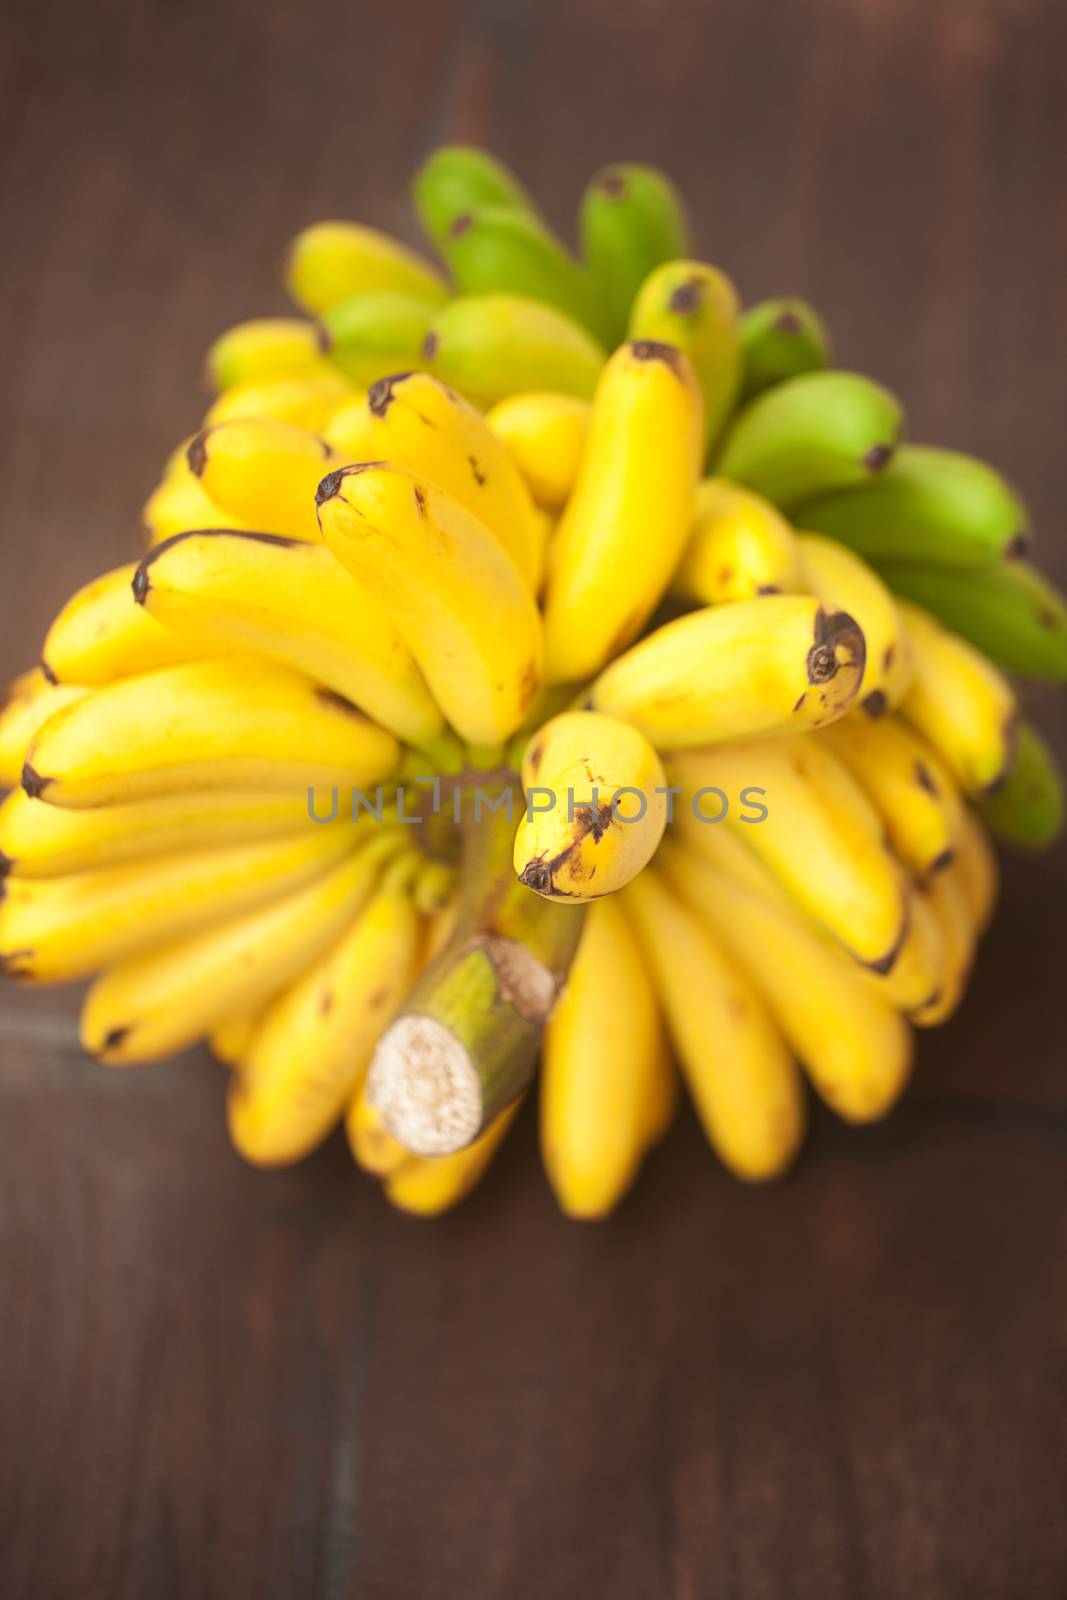 bunch of bananas on a wooden surface